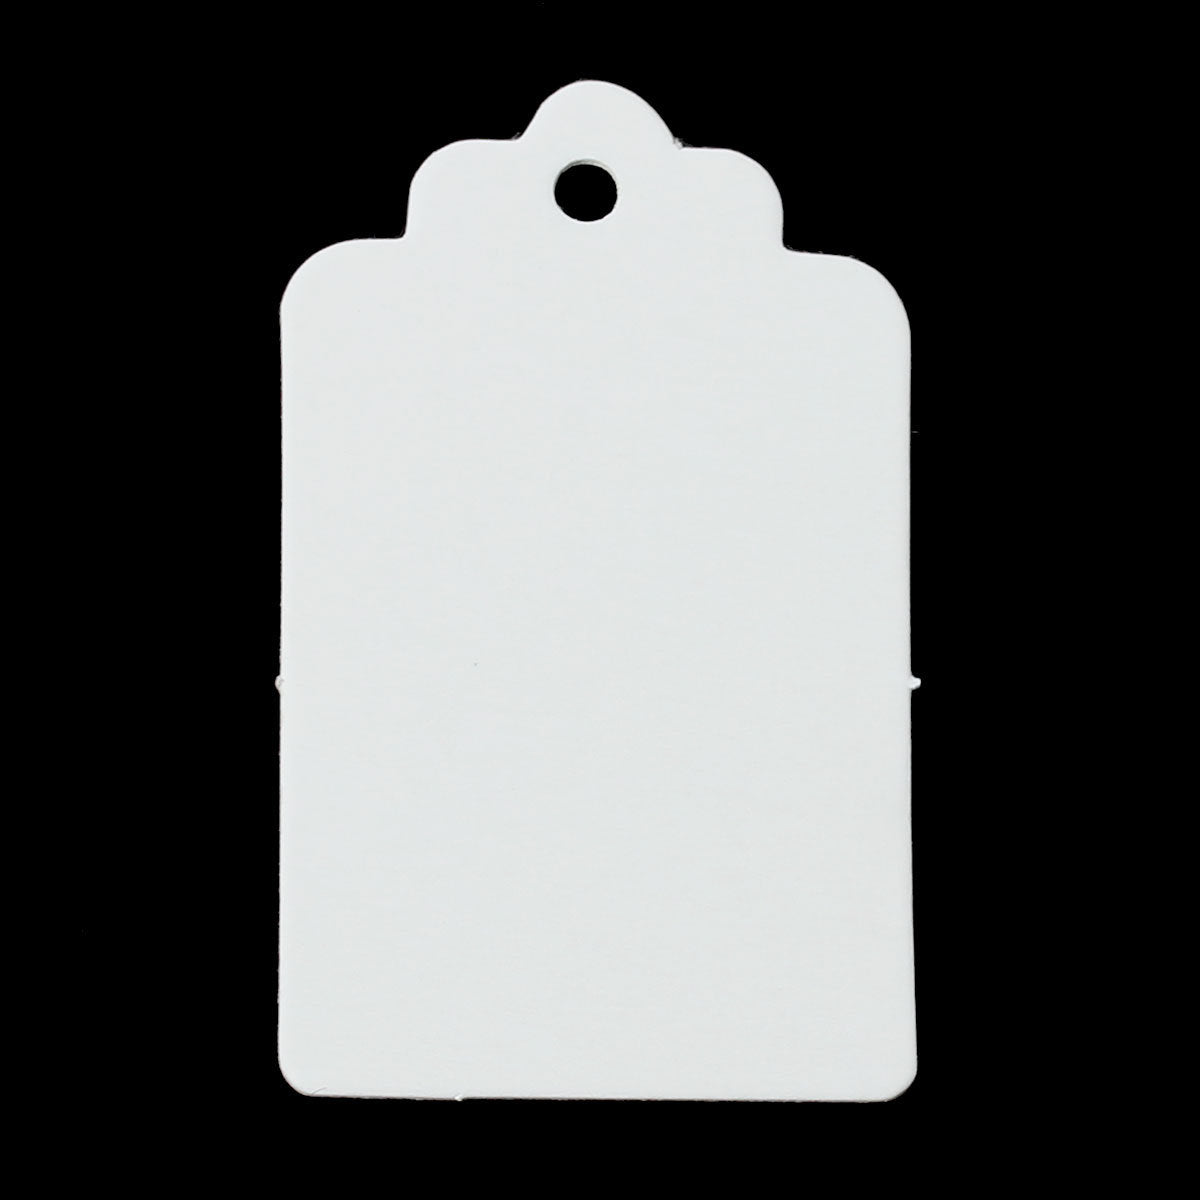 50 Rectangle gift tags - 2 inches blank paper tags